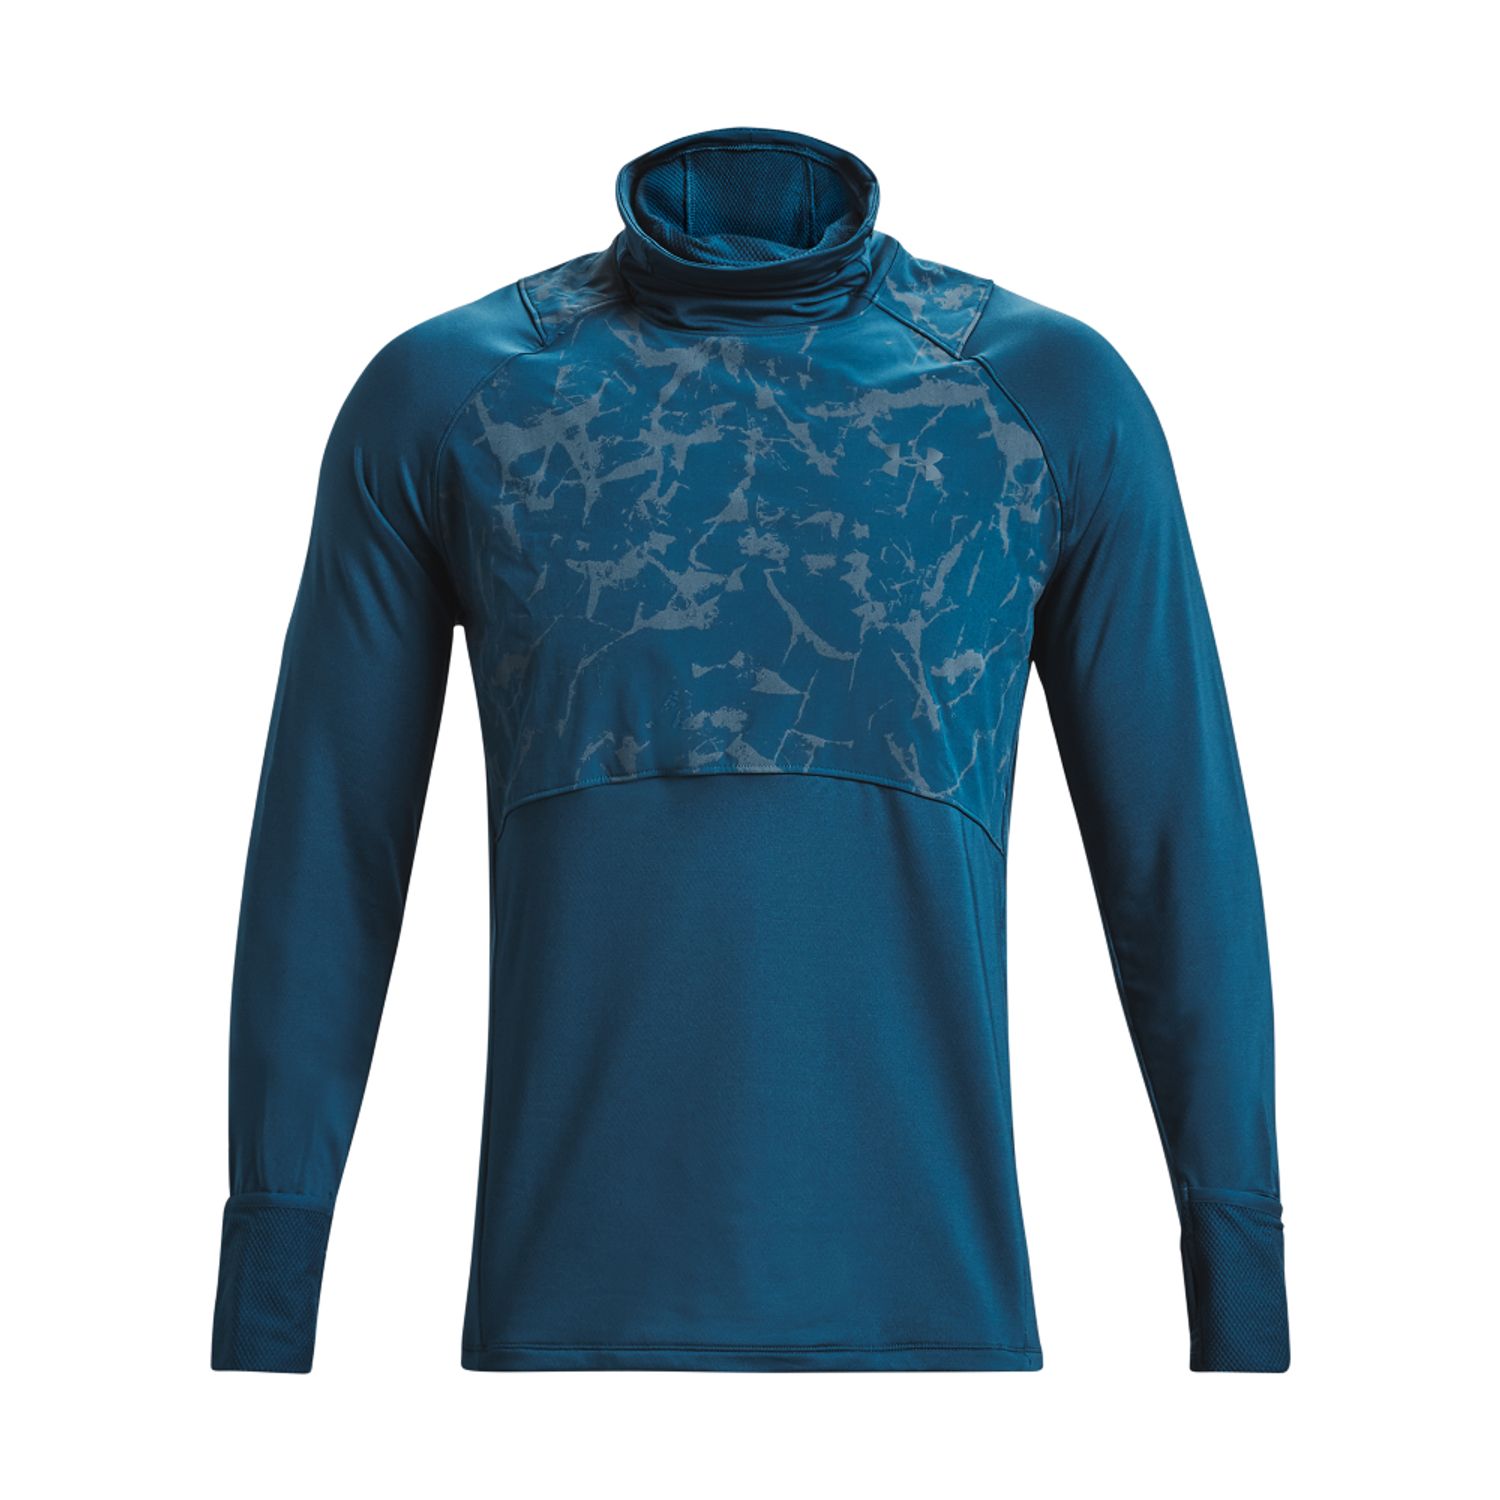 https://gtl-uk.prod.myauroraassets.com/p/146687/mens-ua-outrun-the-cold-funnel-neck-top-1373212437under-armour-mens-ua-outrun-the-cold-funnel-neck-top-1373212437.jpg?t=rp&w=1500&h=1500